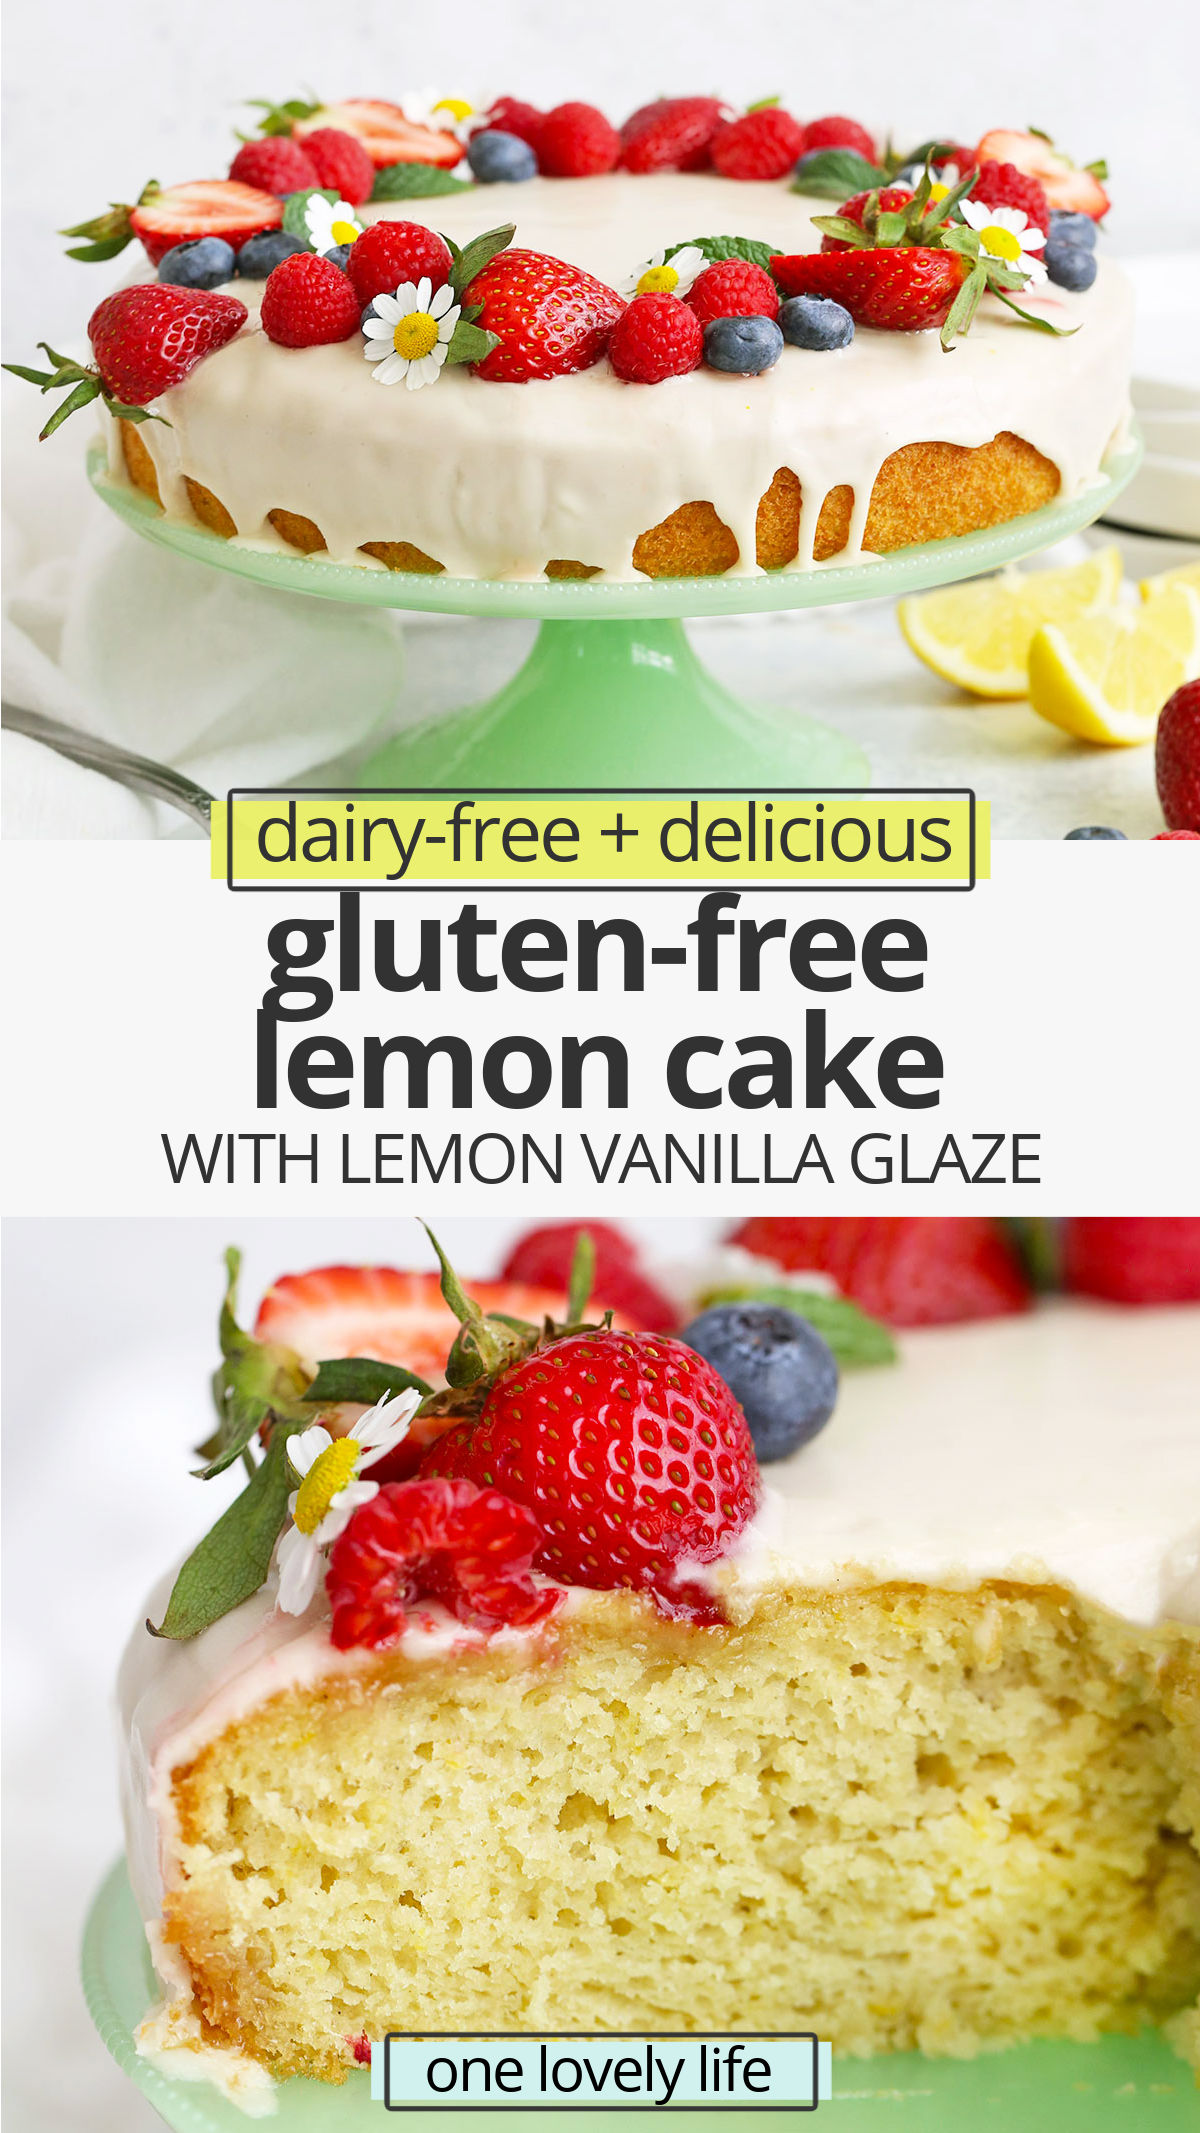 Gluten Free Lemon Cake - This bright, tangy gluten free lemon cake is like eating a bite of sunshine. Gluten free, dairy free, and absolutely delicious. // gluten free lemon cake recipe // dairy free lemon cake recipe // lemon cake recipe // easter dessert // spring dessert // spring cake // summer cake // gluten-free Easter dessert // gluten-free Easter cake